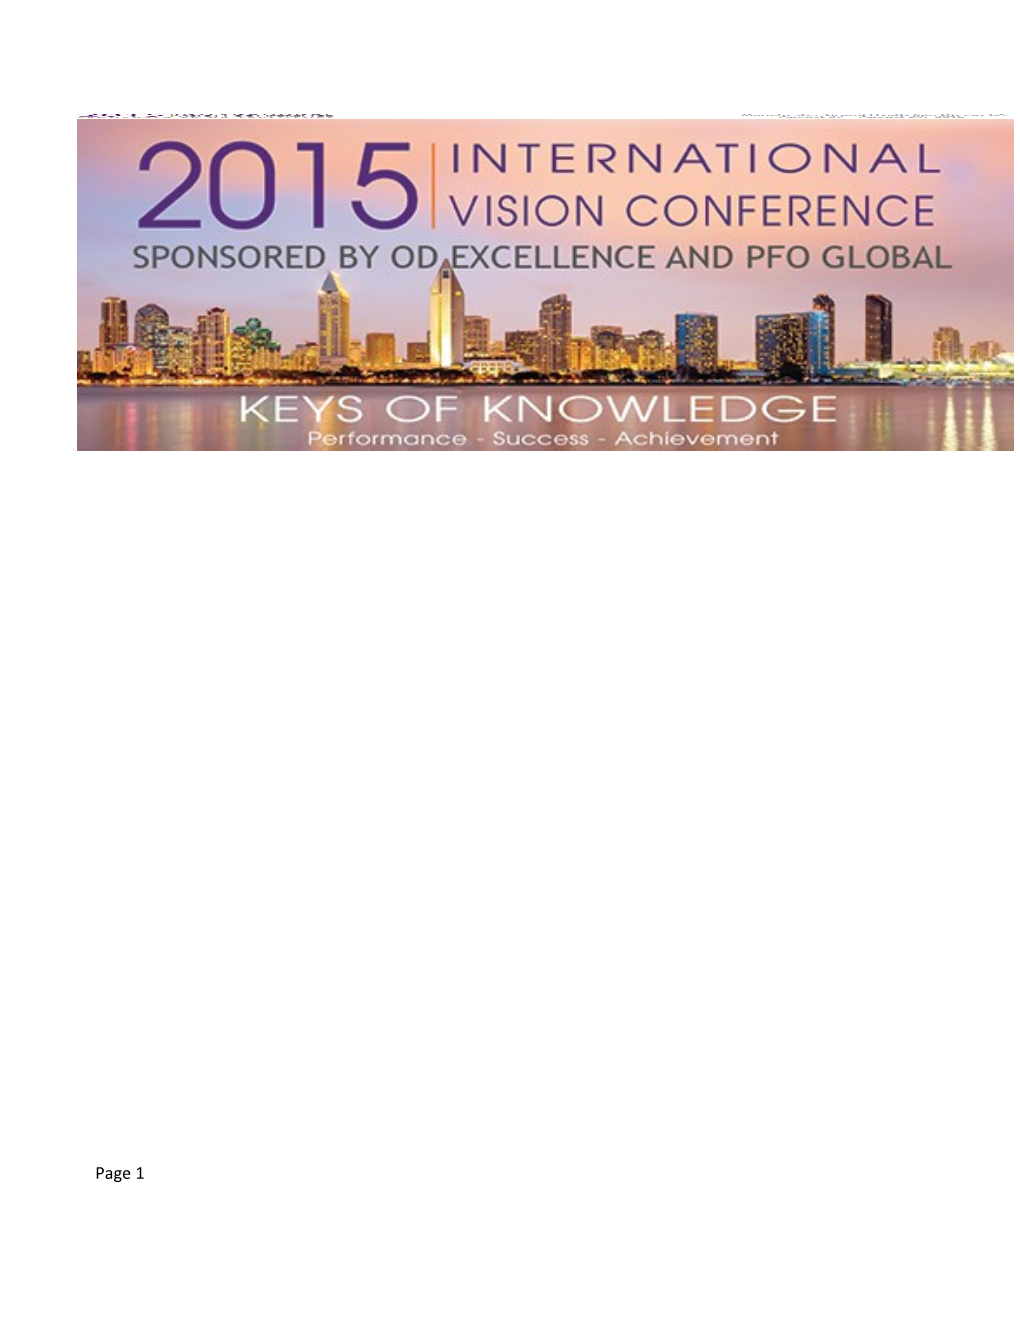 We Would Liketoshare with You Whatyoucanexpectat the 2015 Internationalvisionconference